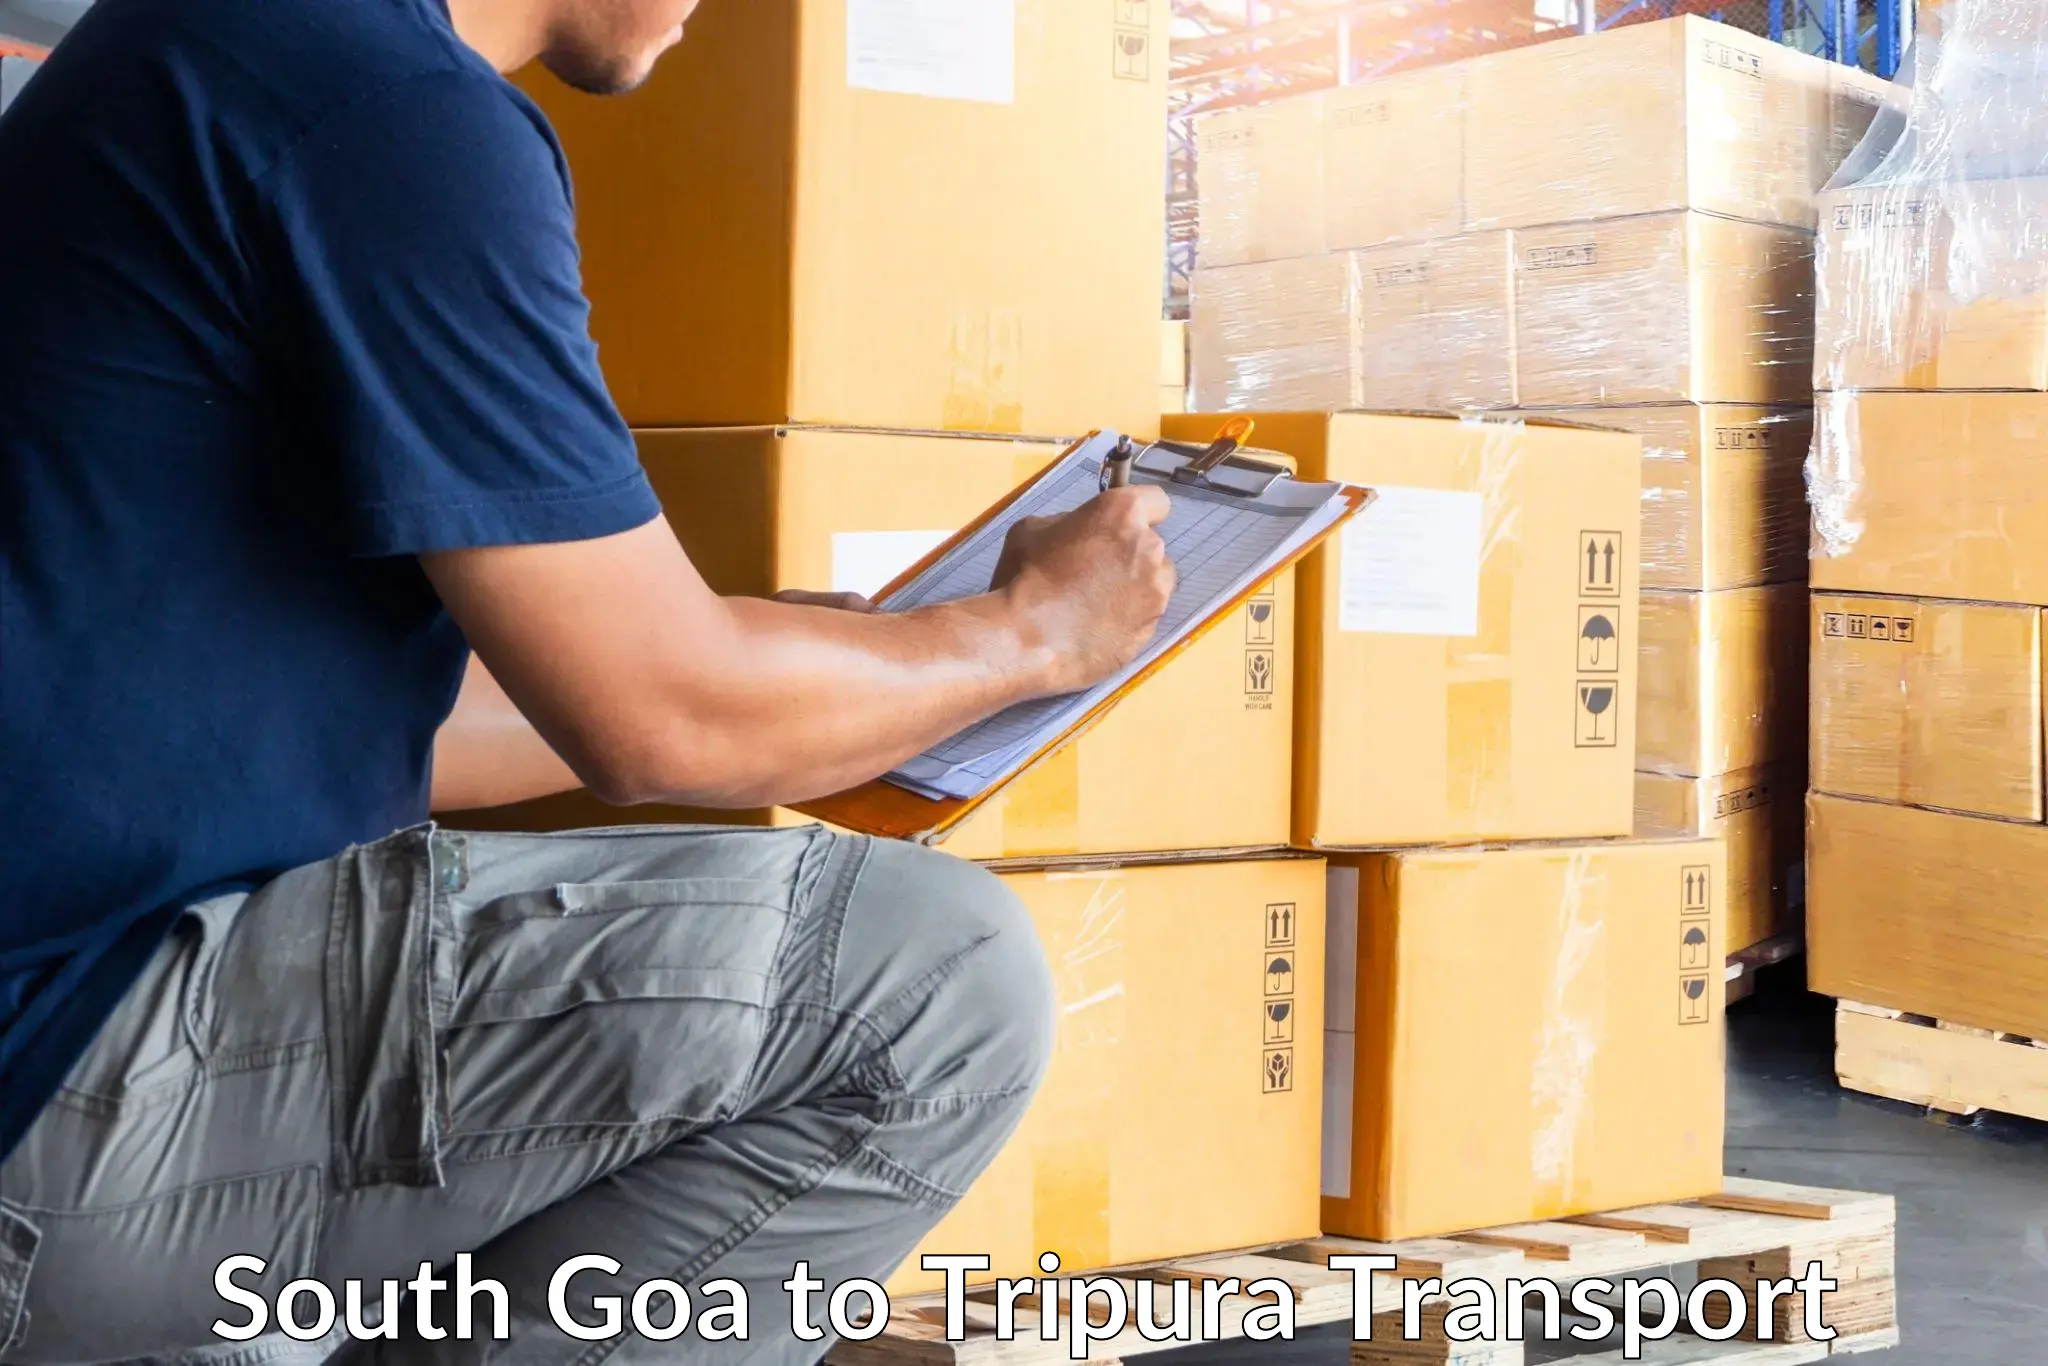 Daily parcel service transport South Goa to Dharmanagar